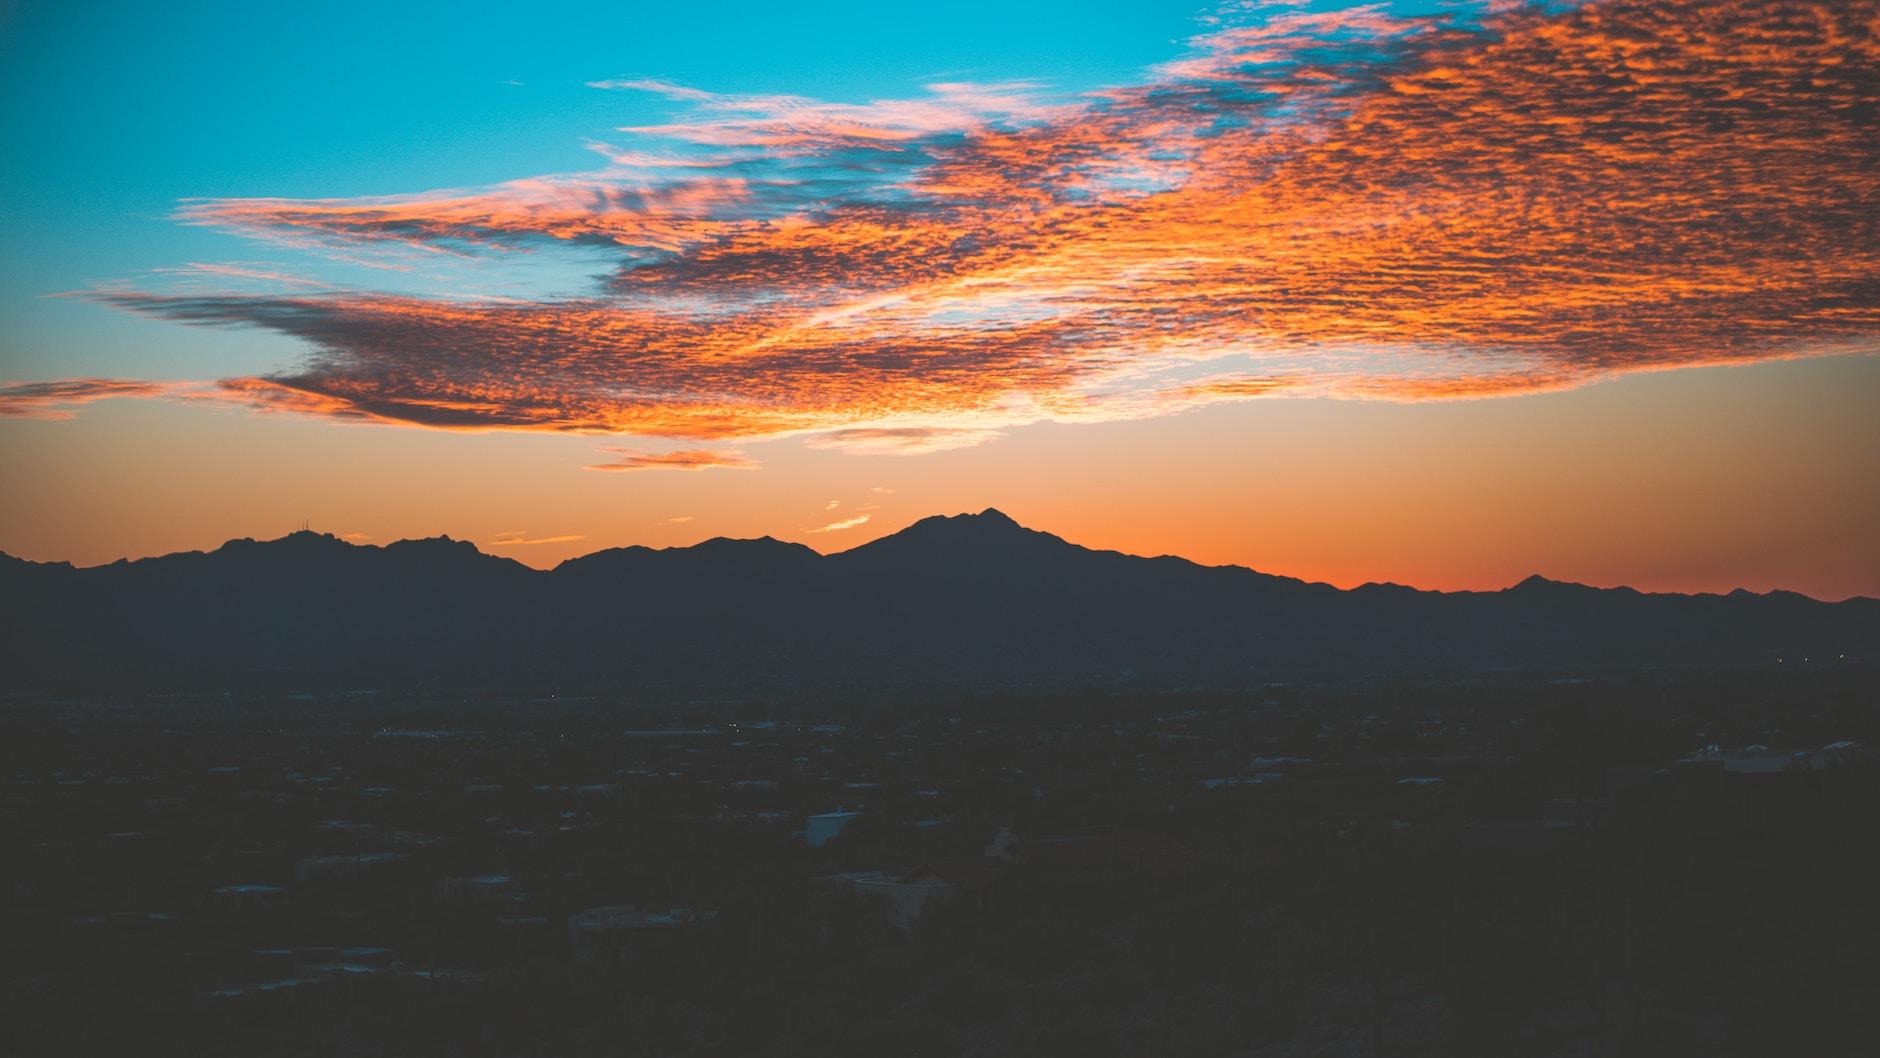 What is the nicest suburb of Tucson?